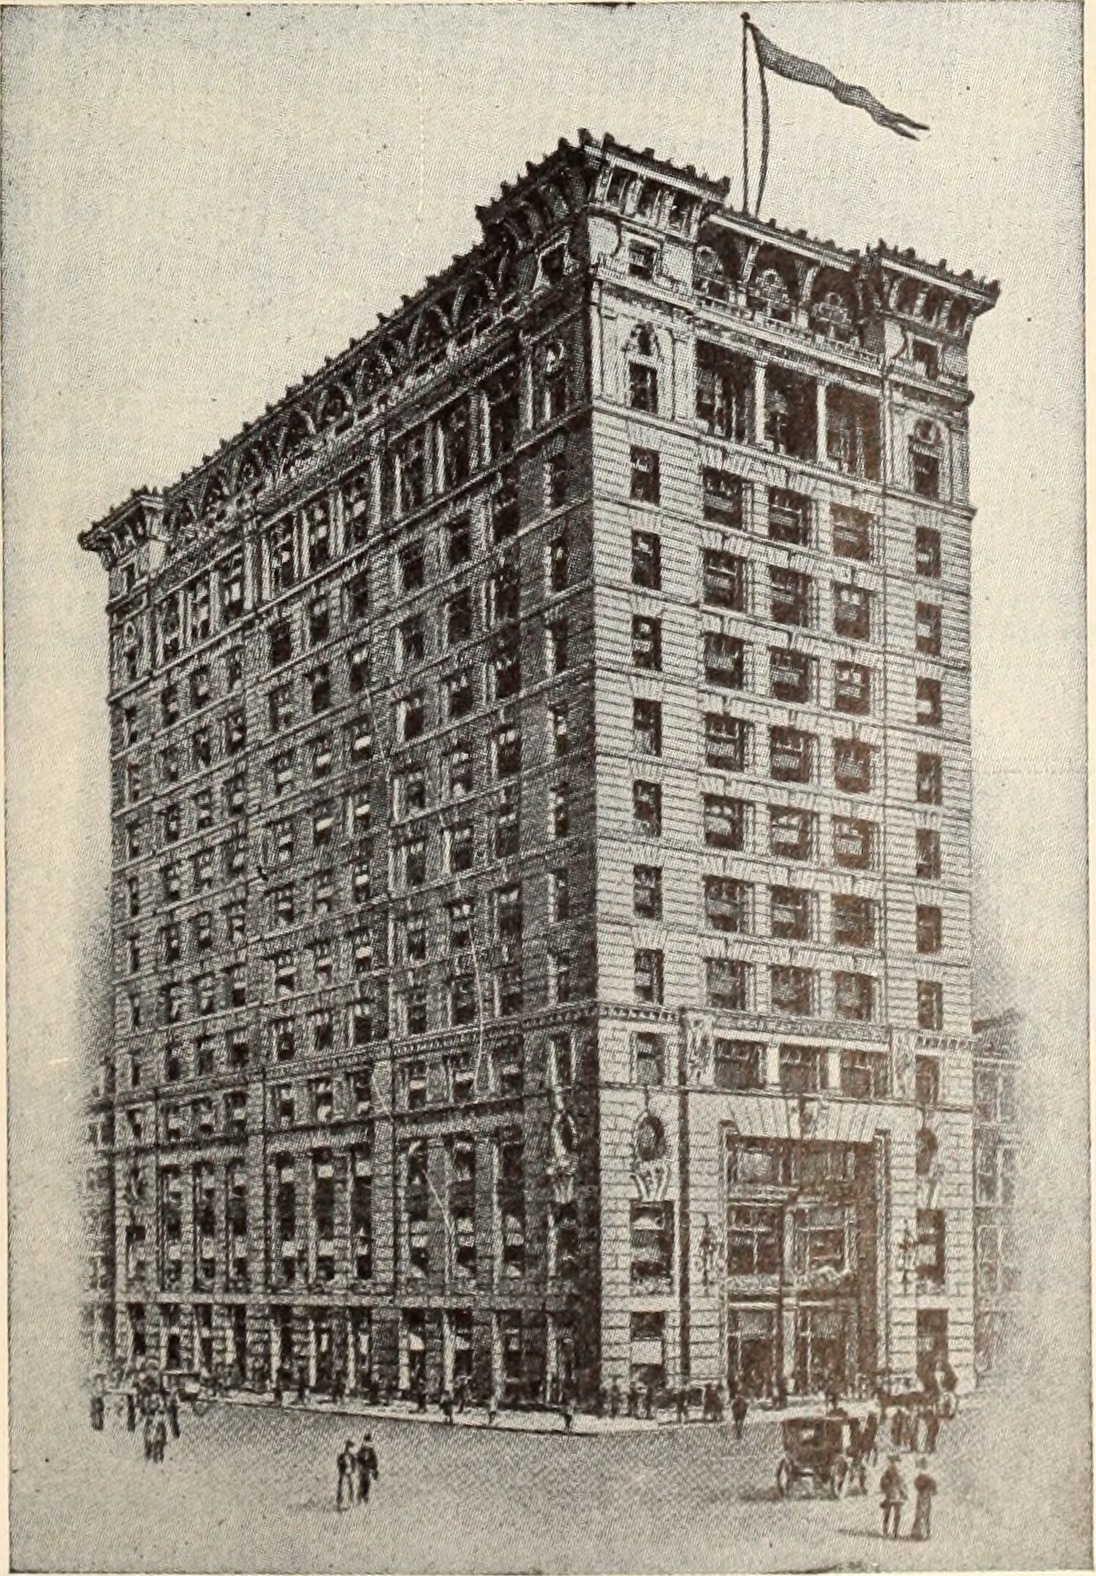 Image from page 570 of "The Commercial and financial chronicle" (1909)